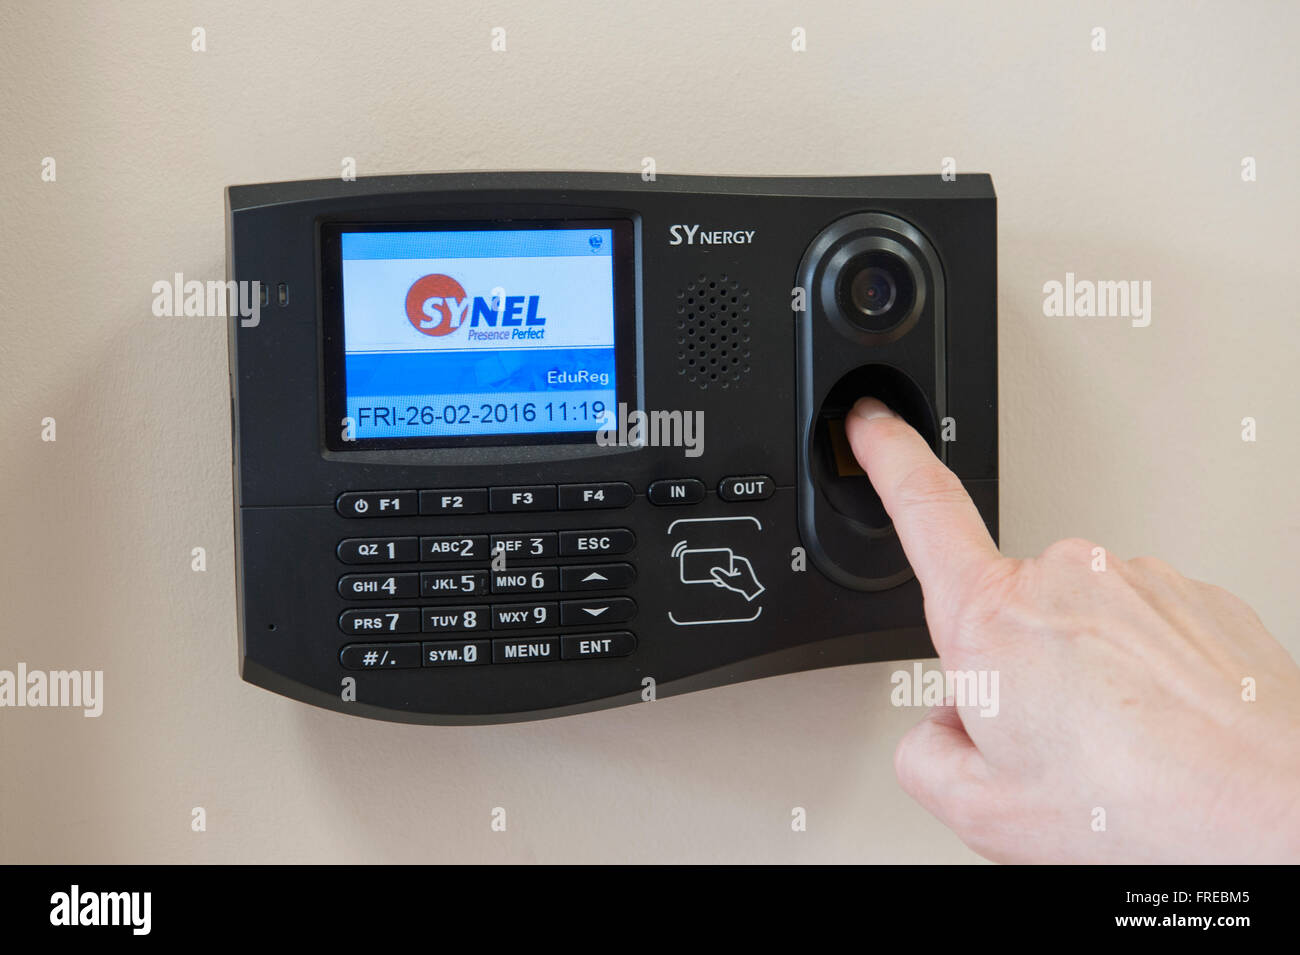 Biometric identification fingerprint recognition security access control in use Stock Photo